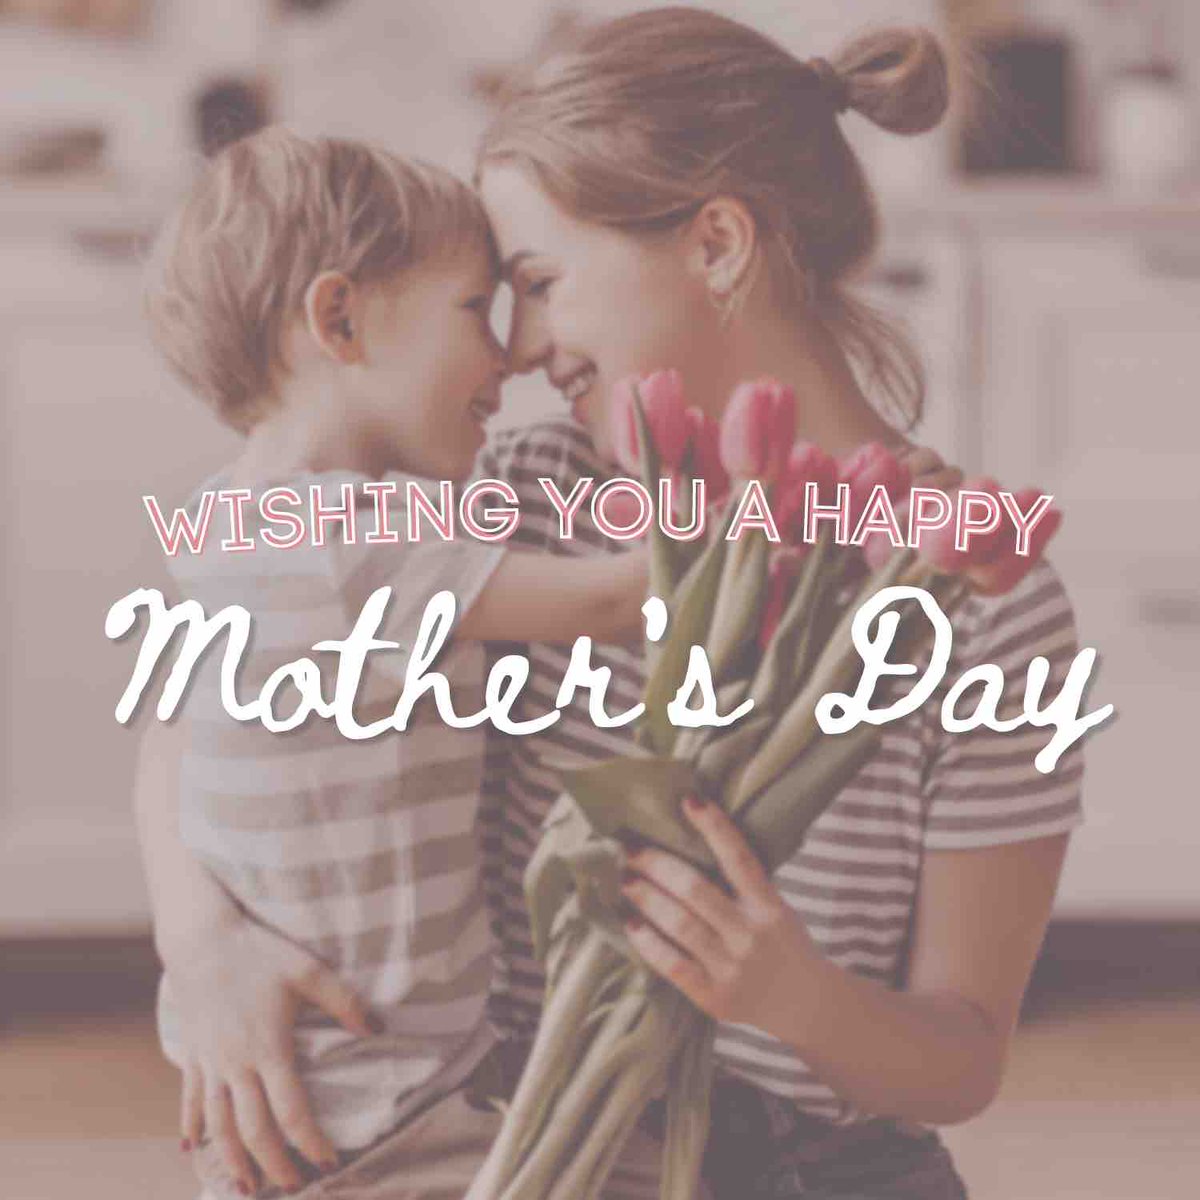 Happy Mother’s Day! As a mother of seven, I know the strength and leadership all mothers in their families — thank you for your dedication. May you feel extra loved and appreciated on this very important day.